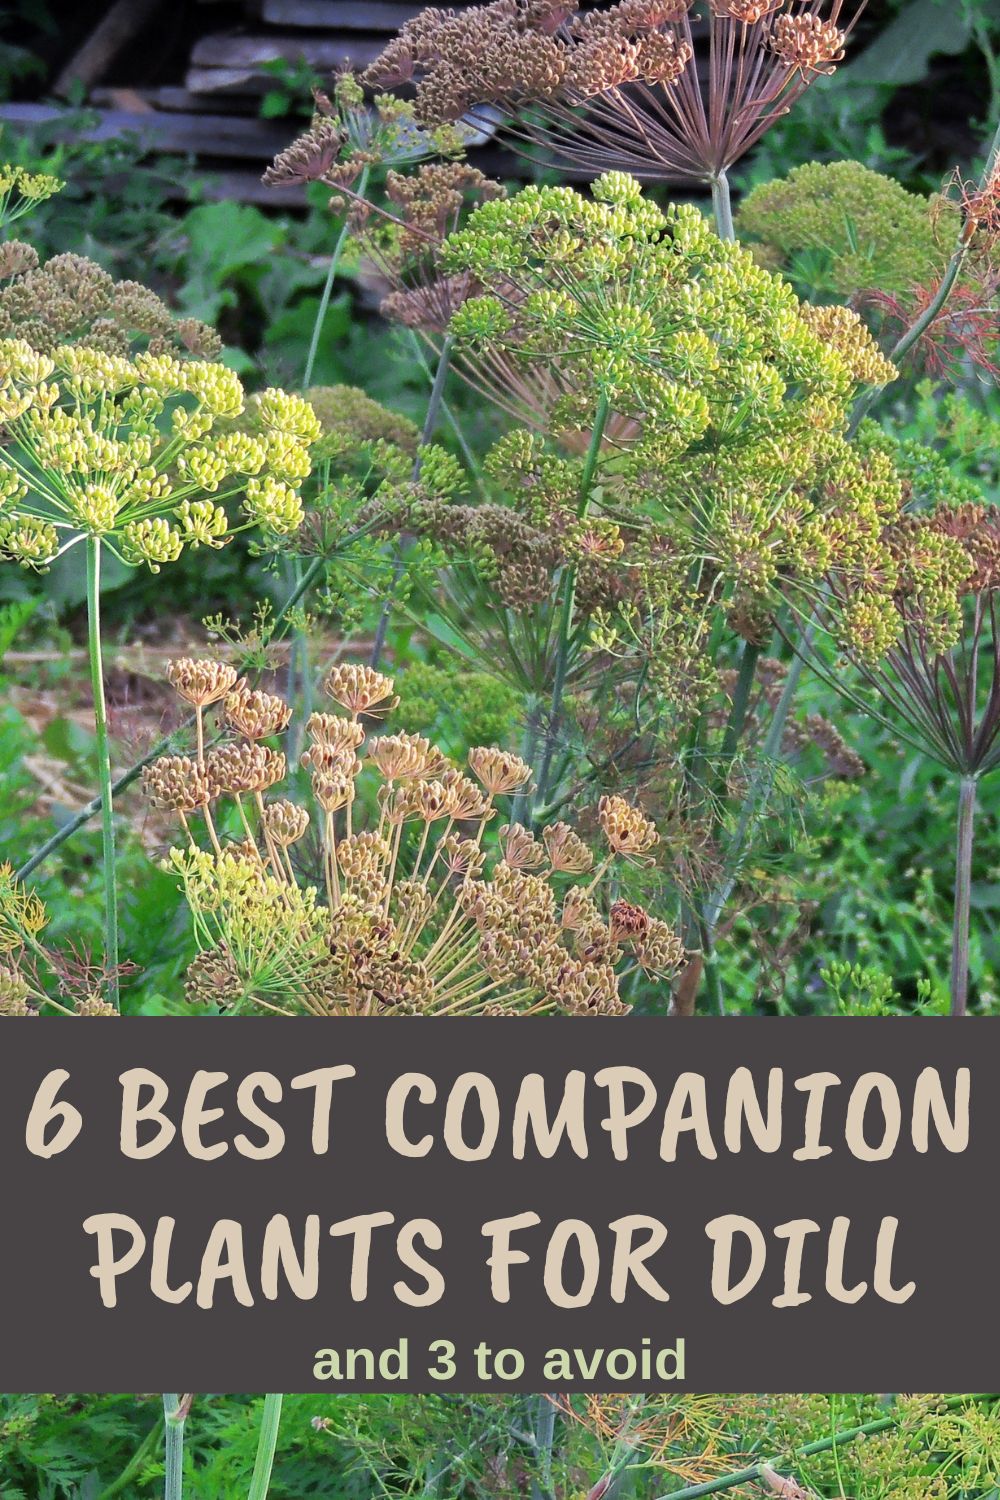 6 Best Companion Plants for Dill, And 3 to Avoid